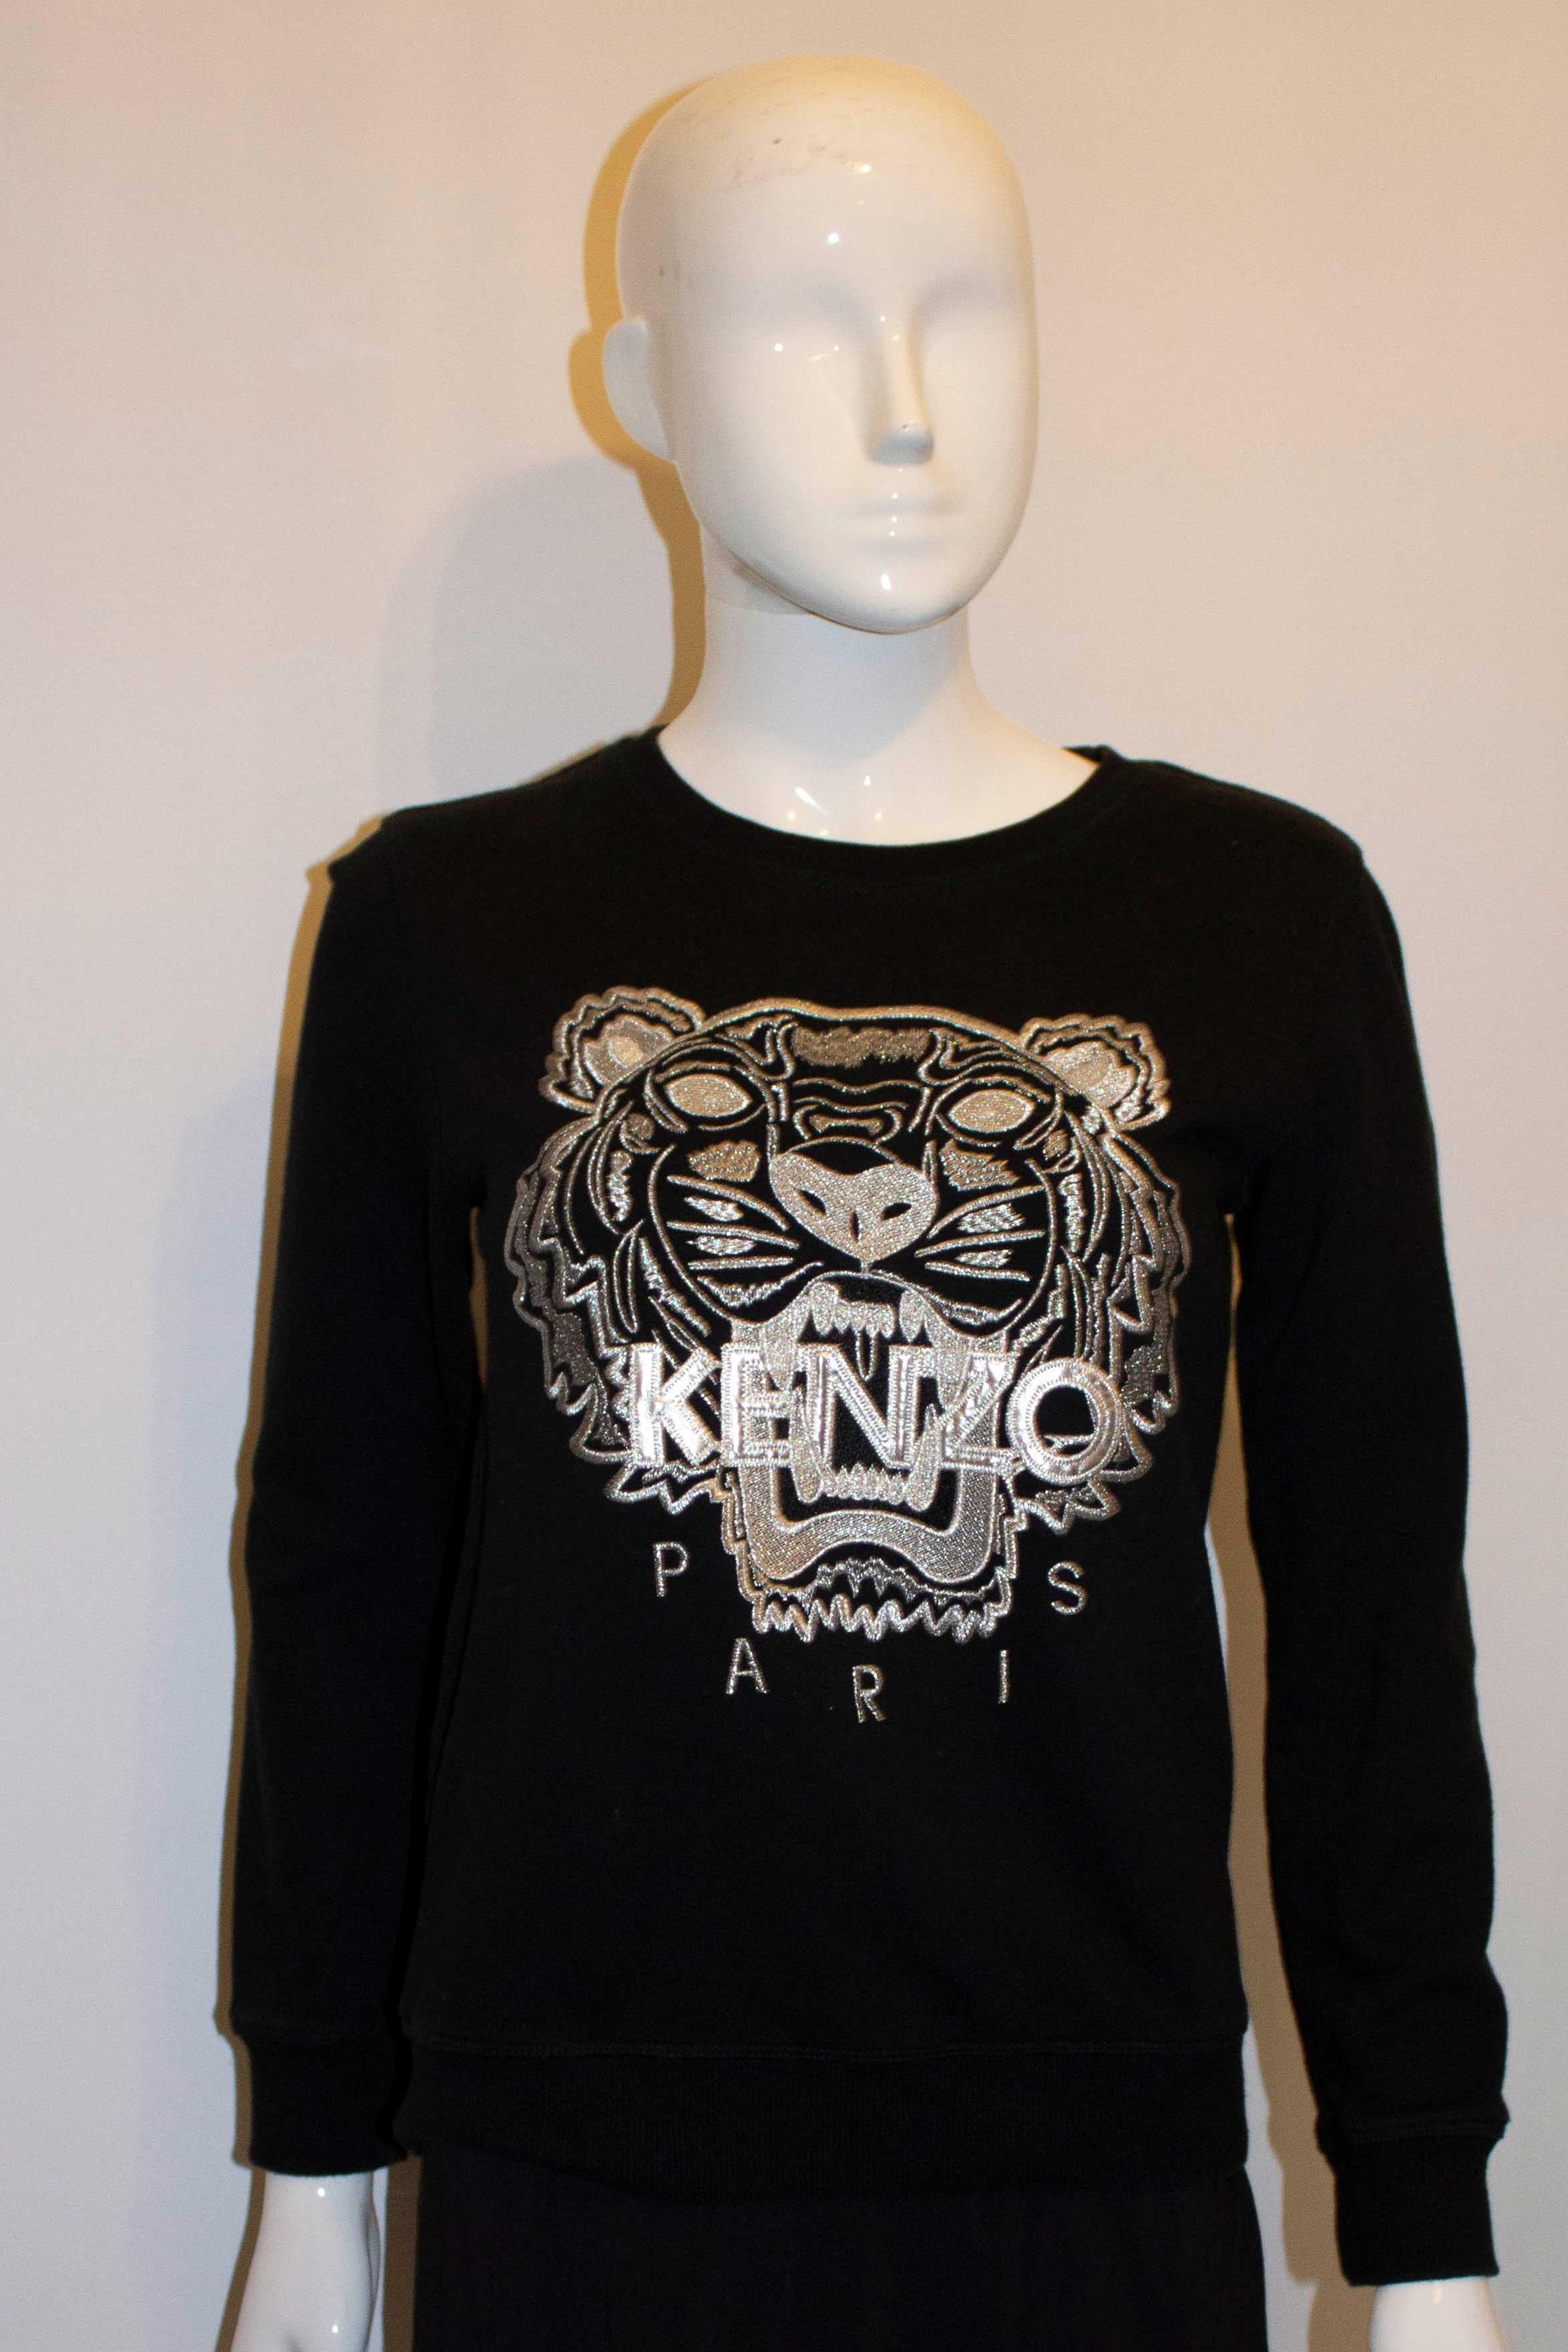 Kenzo Paris Black Sweatshirt with Silver Embroidery In Excellent Condition For Sale In London, GB